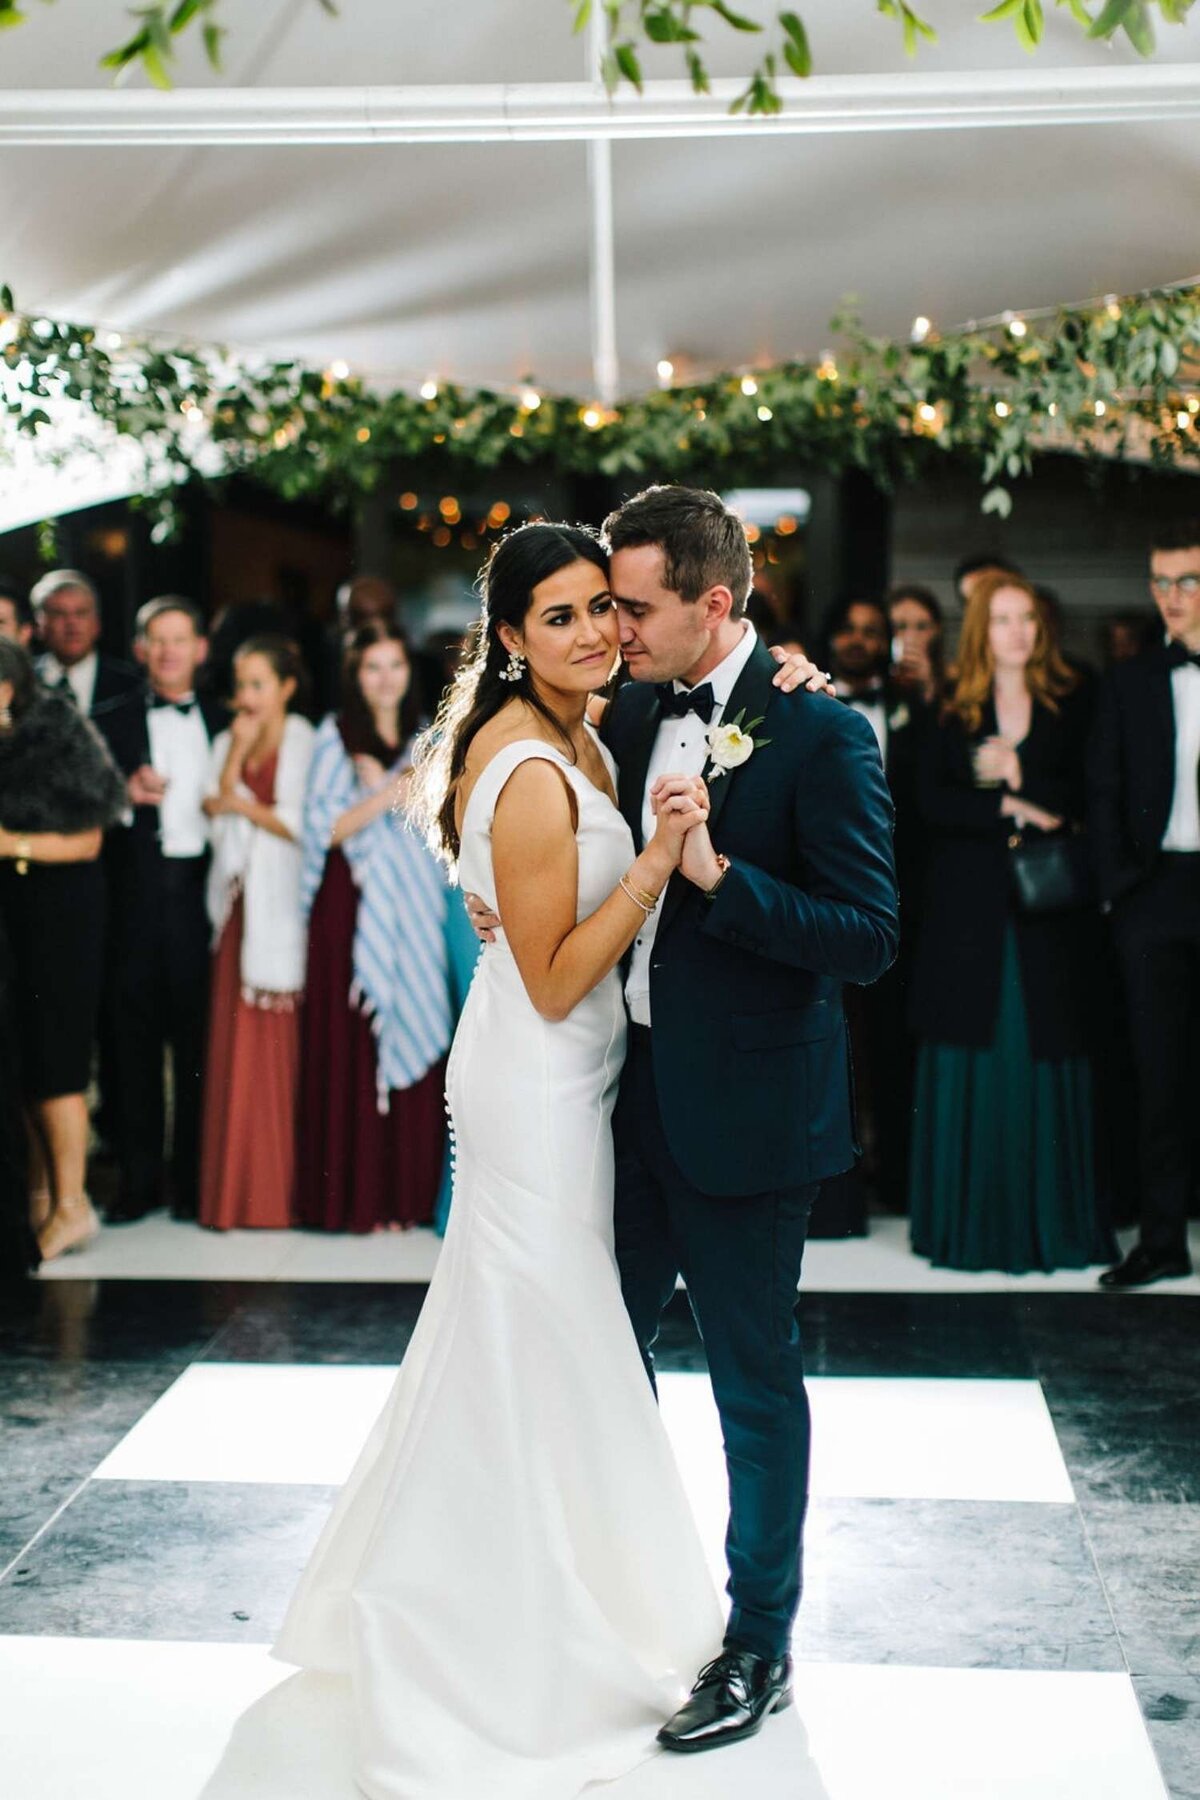 First Dance at Tented Lakeside Michigan Fall Luxury Wedding